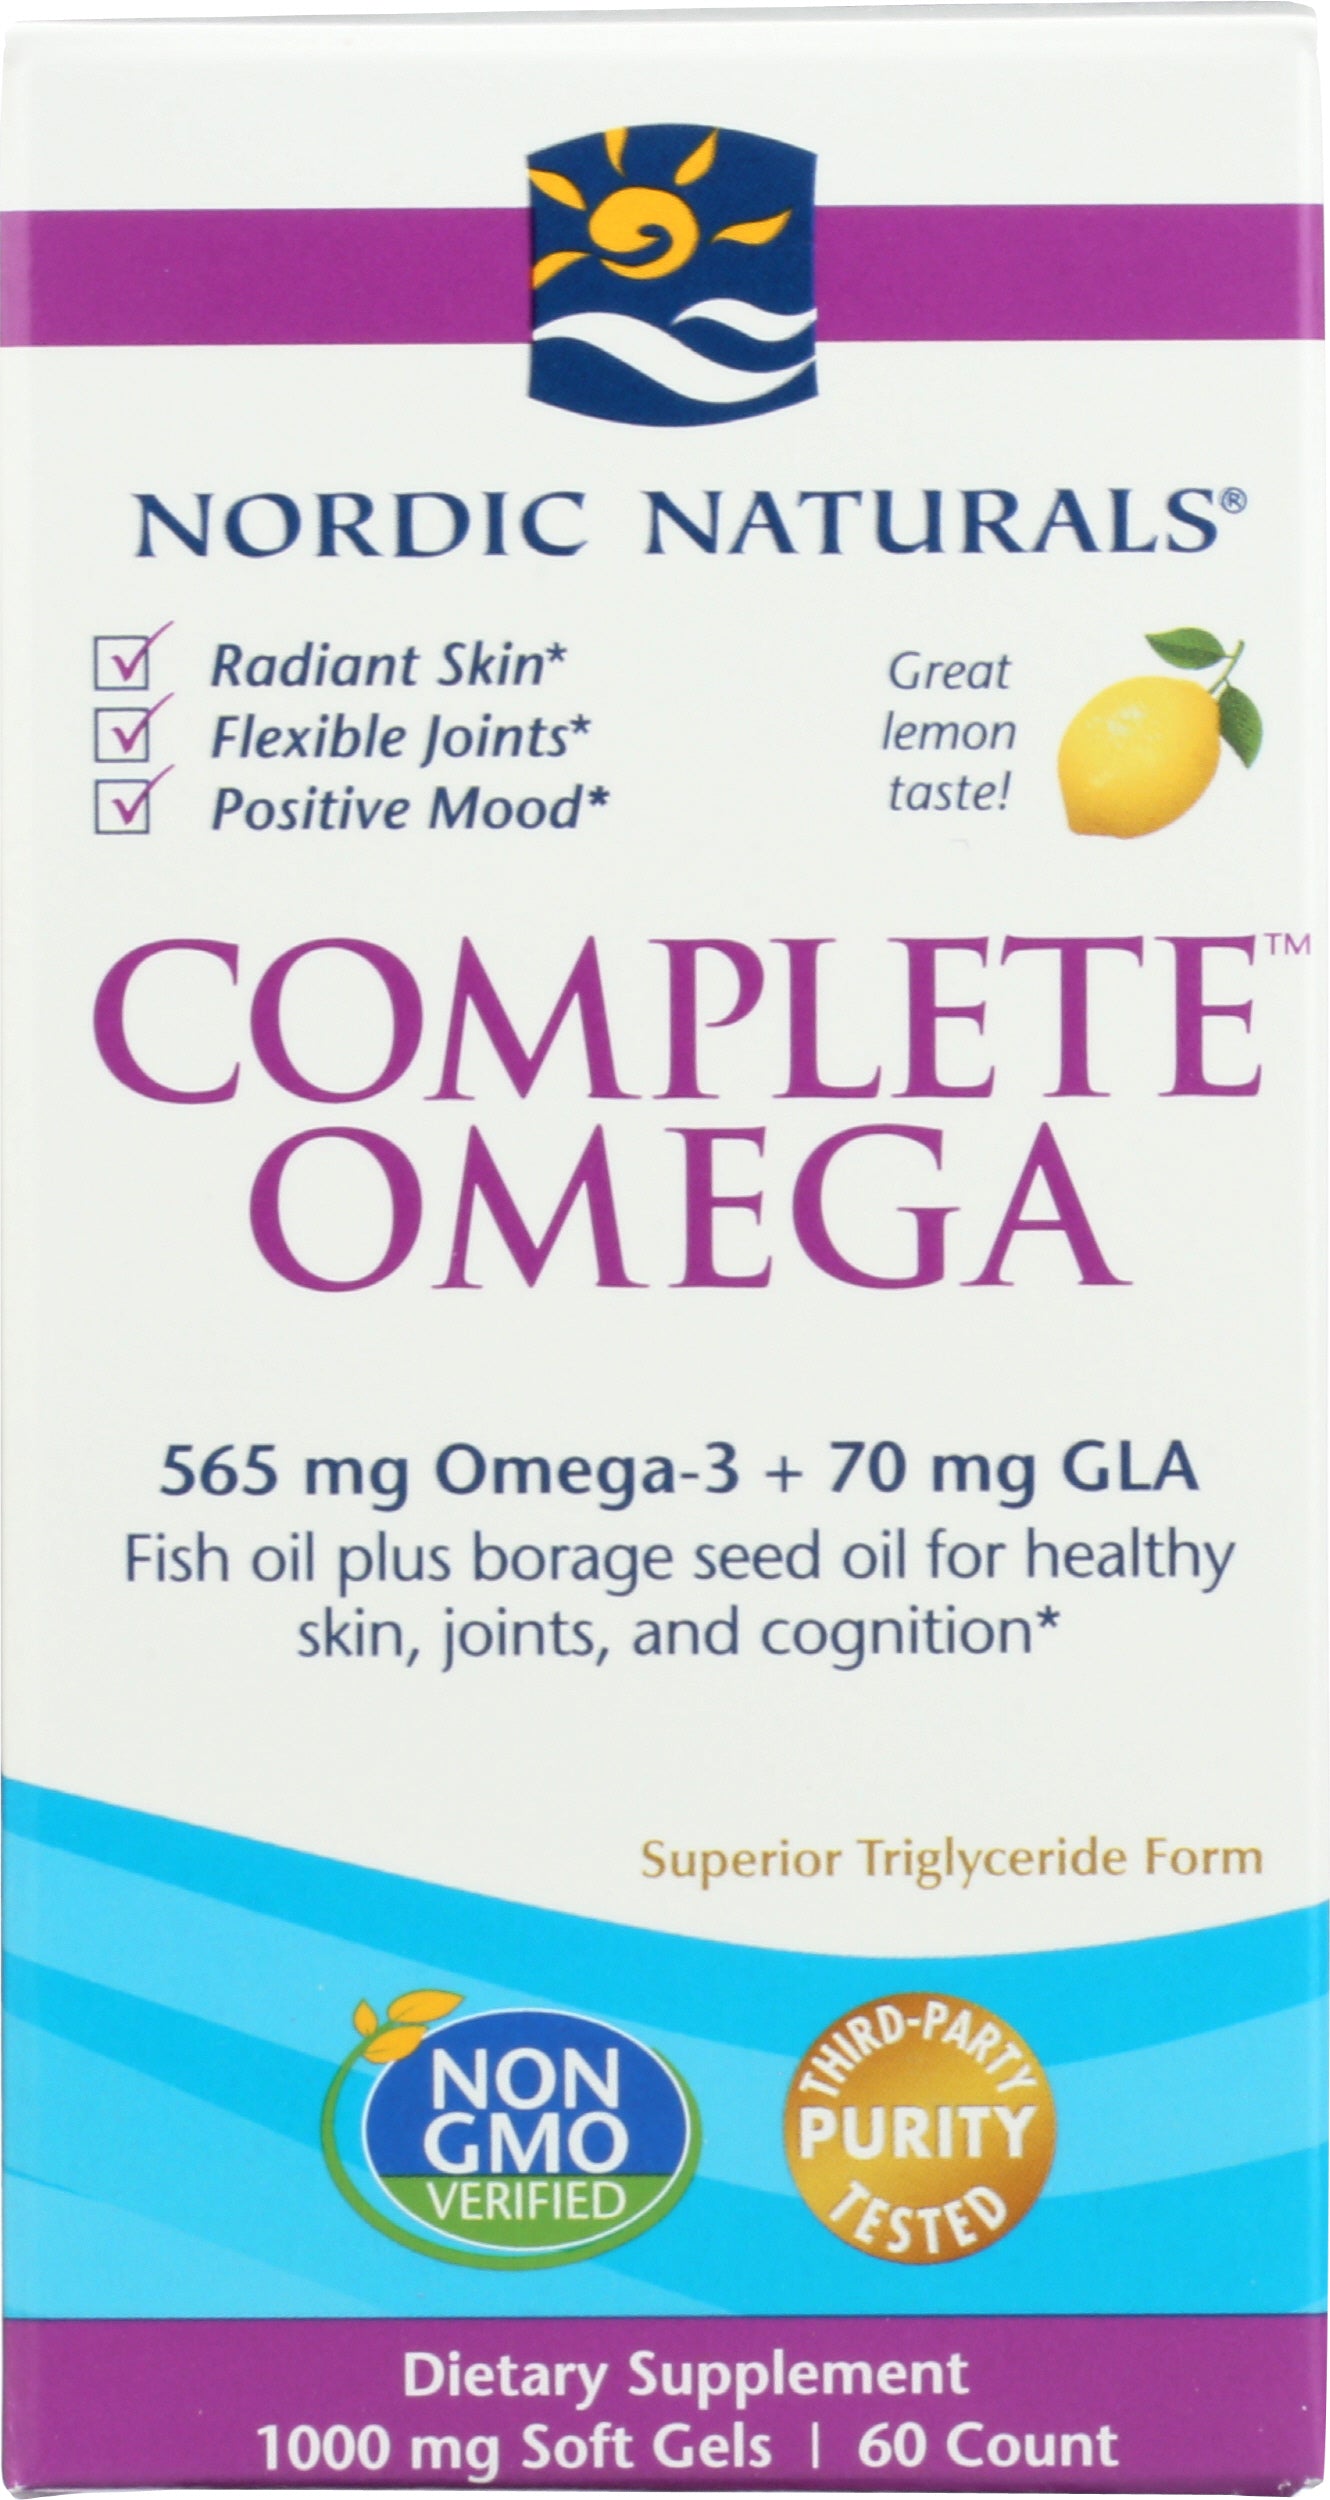 Nordic Naturals Complete Omega 565 mg + 70 mg GLA 60 Soft Gels Front of Box